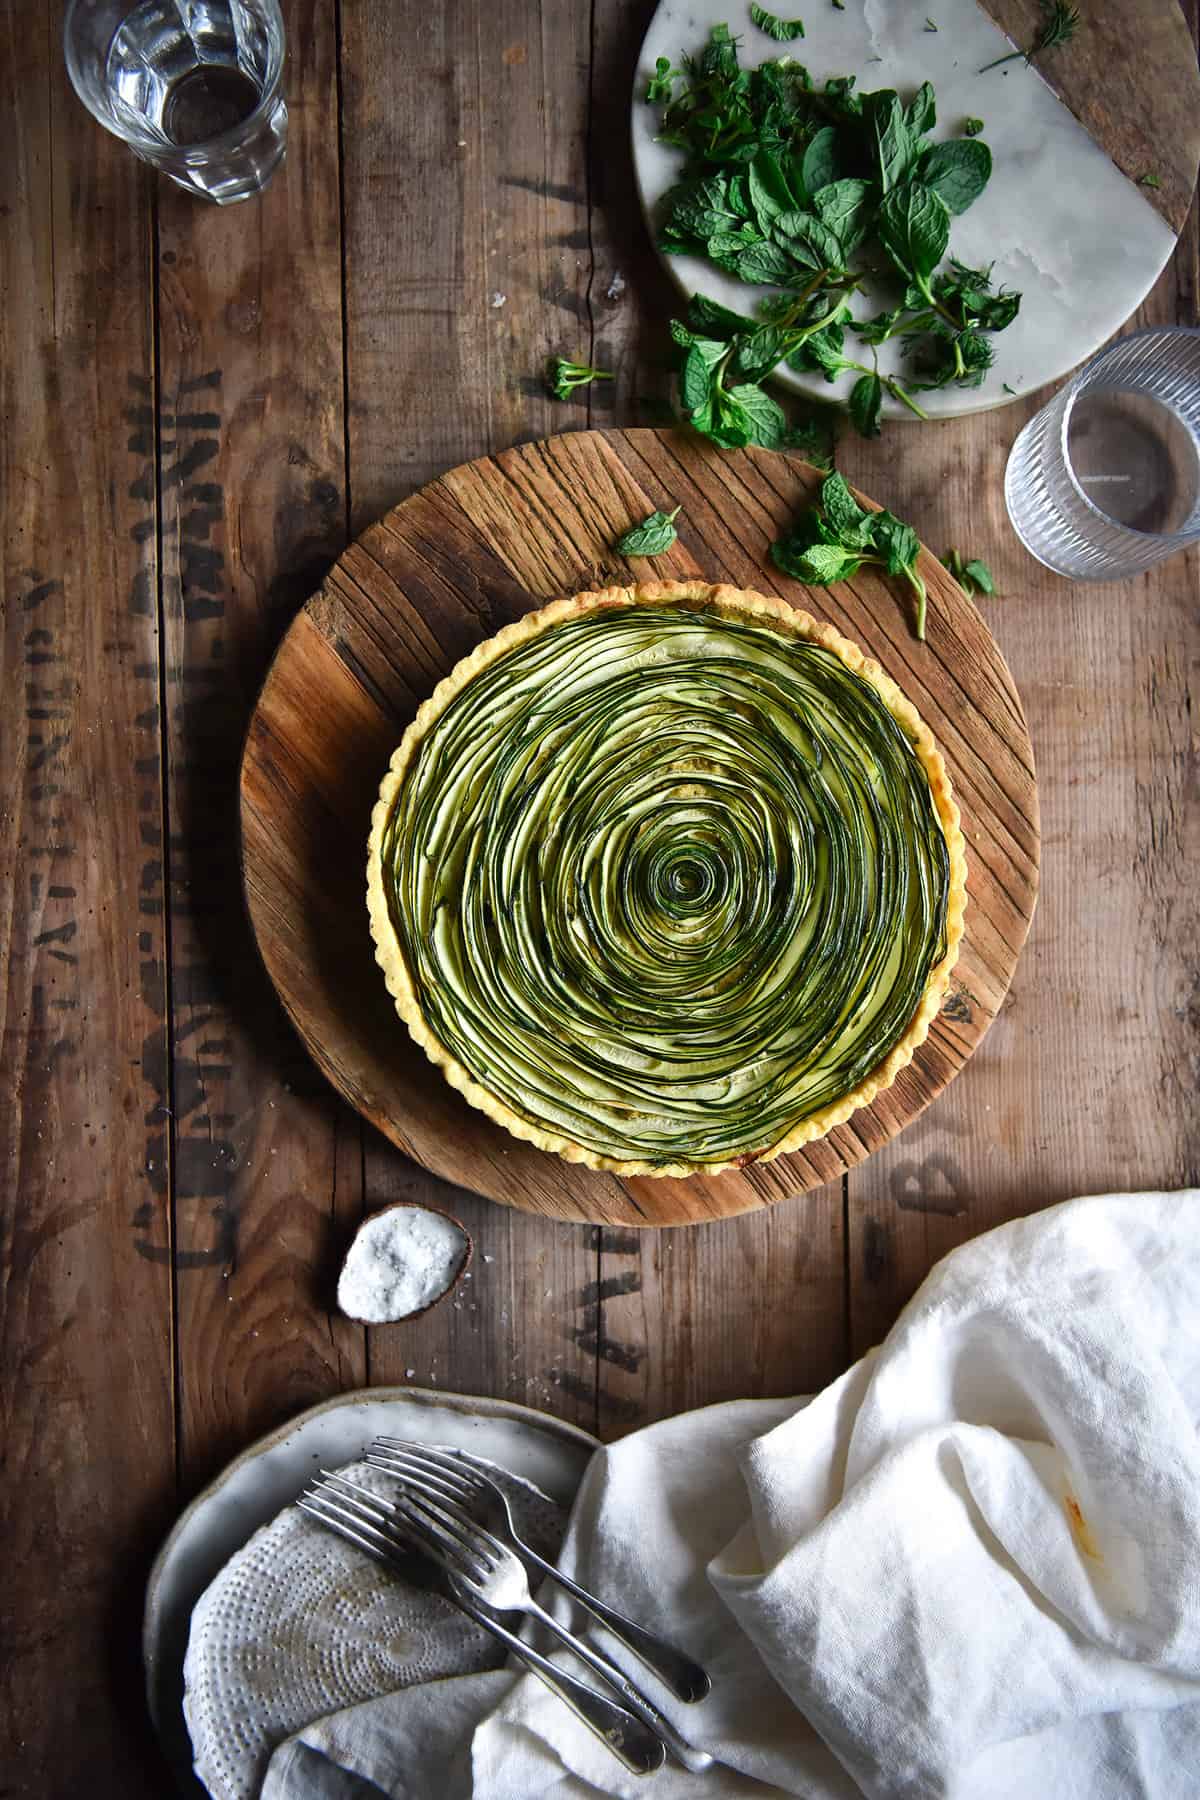 An aerial image of a zucchini swirl tart on a wooden board atop a wooden table. The tart is surrounded by glasses of water, extra mint on a marble board, plates and a white linen cloth.